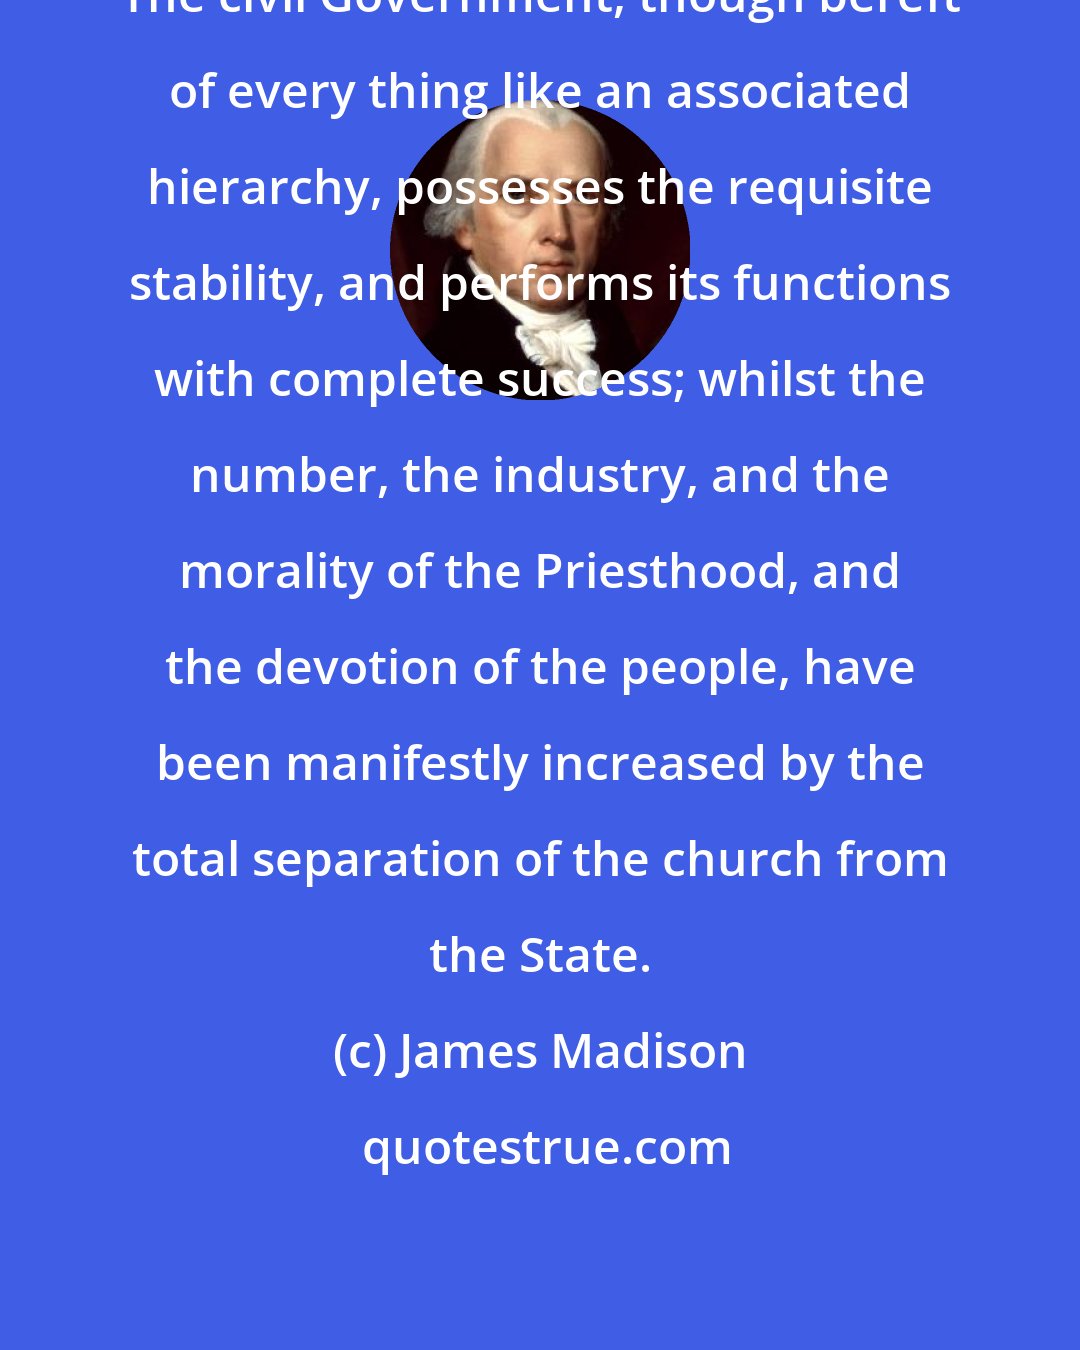 James Madison: The civil Government, though bereft of every thing like an associated hierarchy, possesses the requisite stability, and performs its functions with complete success; whilst the number, the industry, and the morality of the Priesthood, and the devotion of the people, have been manifestly increased by the total separation of the church from the State.